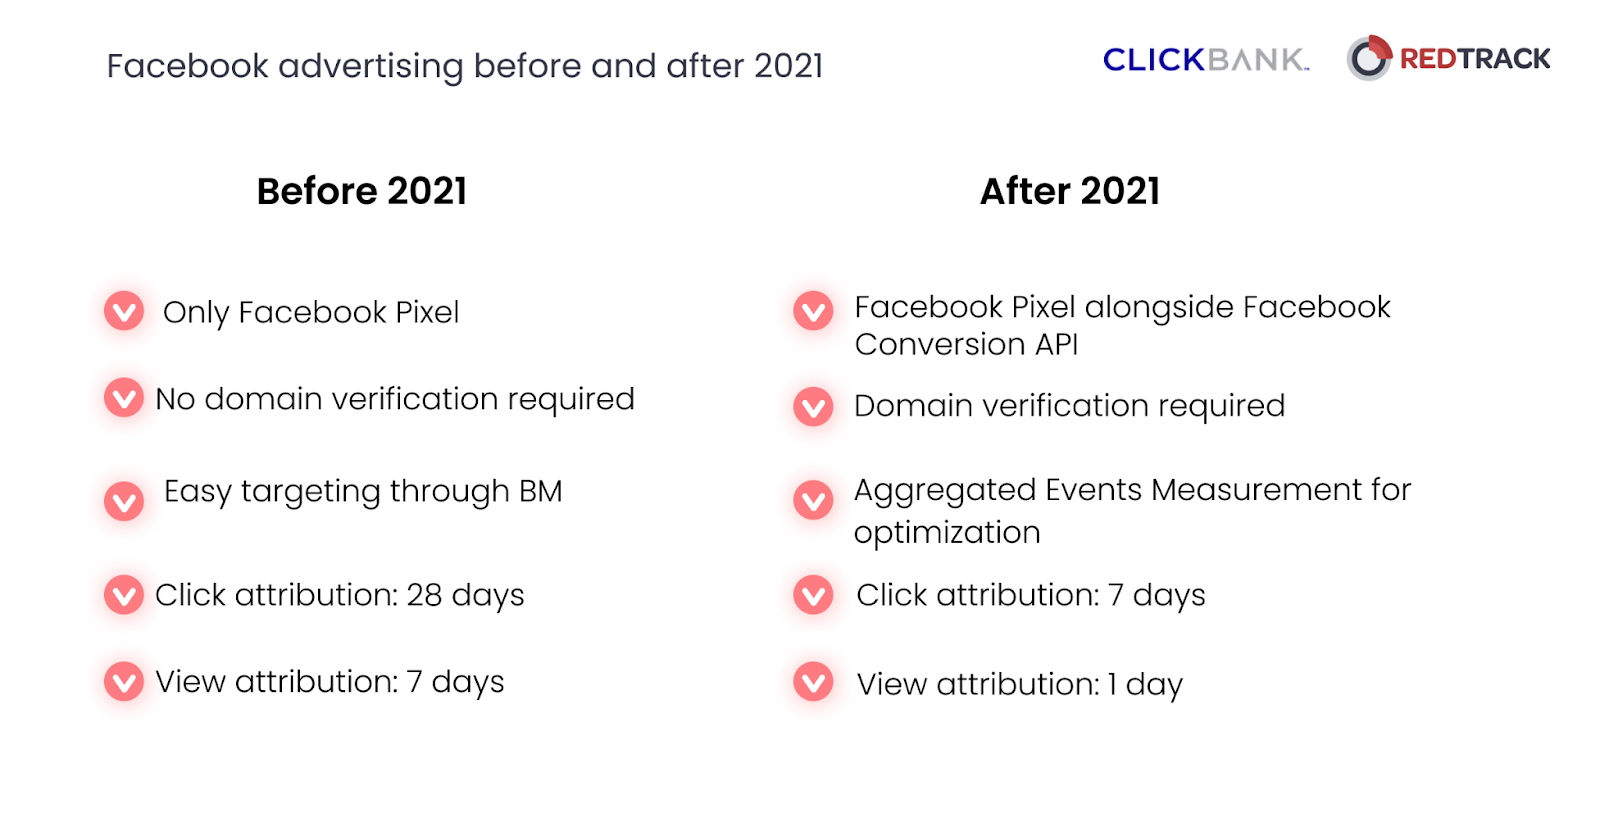 Facebook advertising for affiliate marketing - before and after 2021